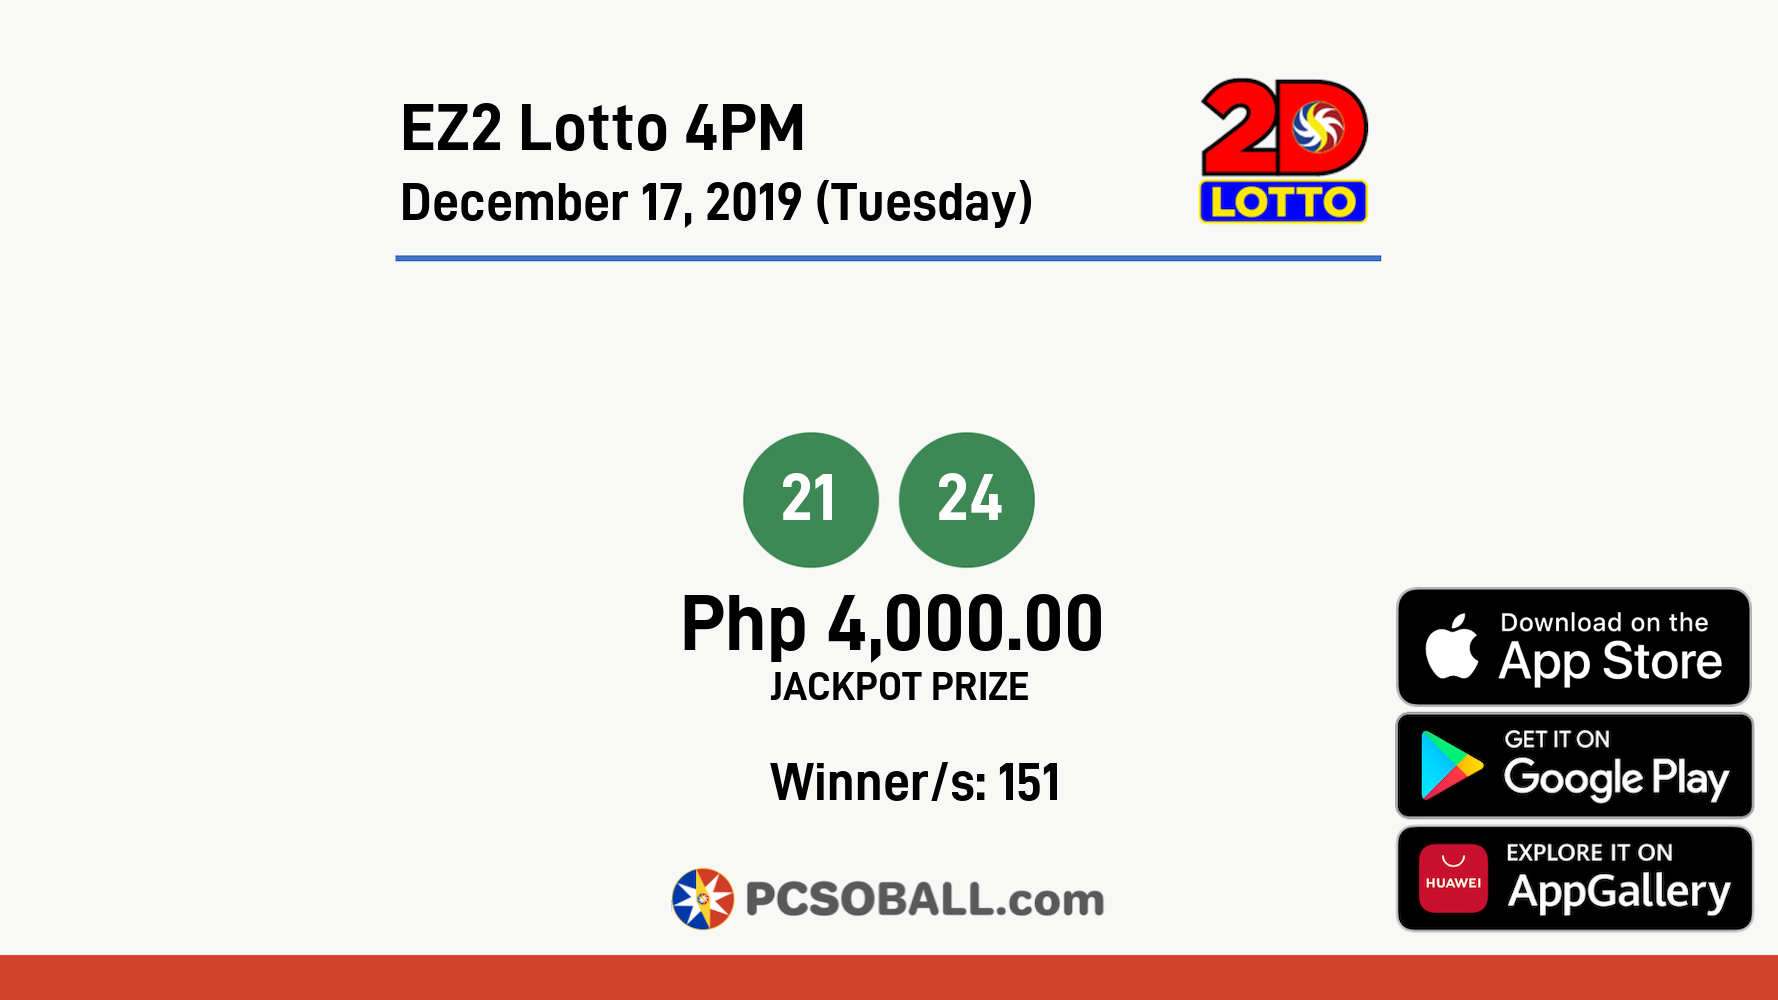 EZ2 Lotto 4PM December 17, 2019 (Tuesday) Result